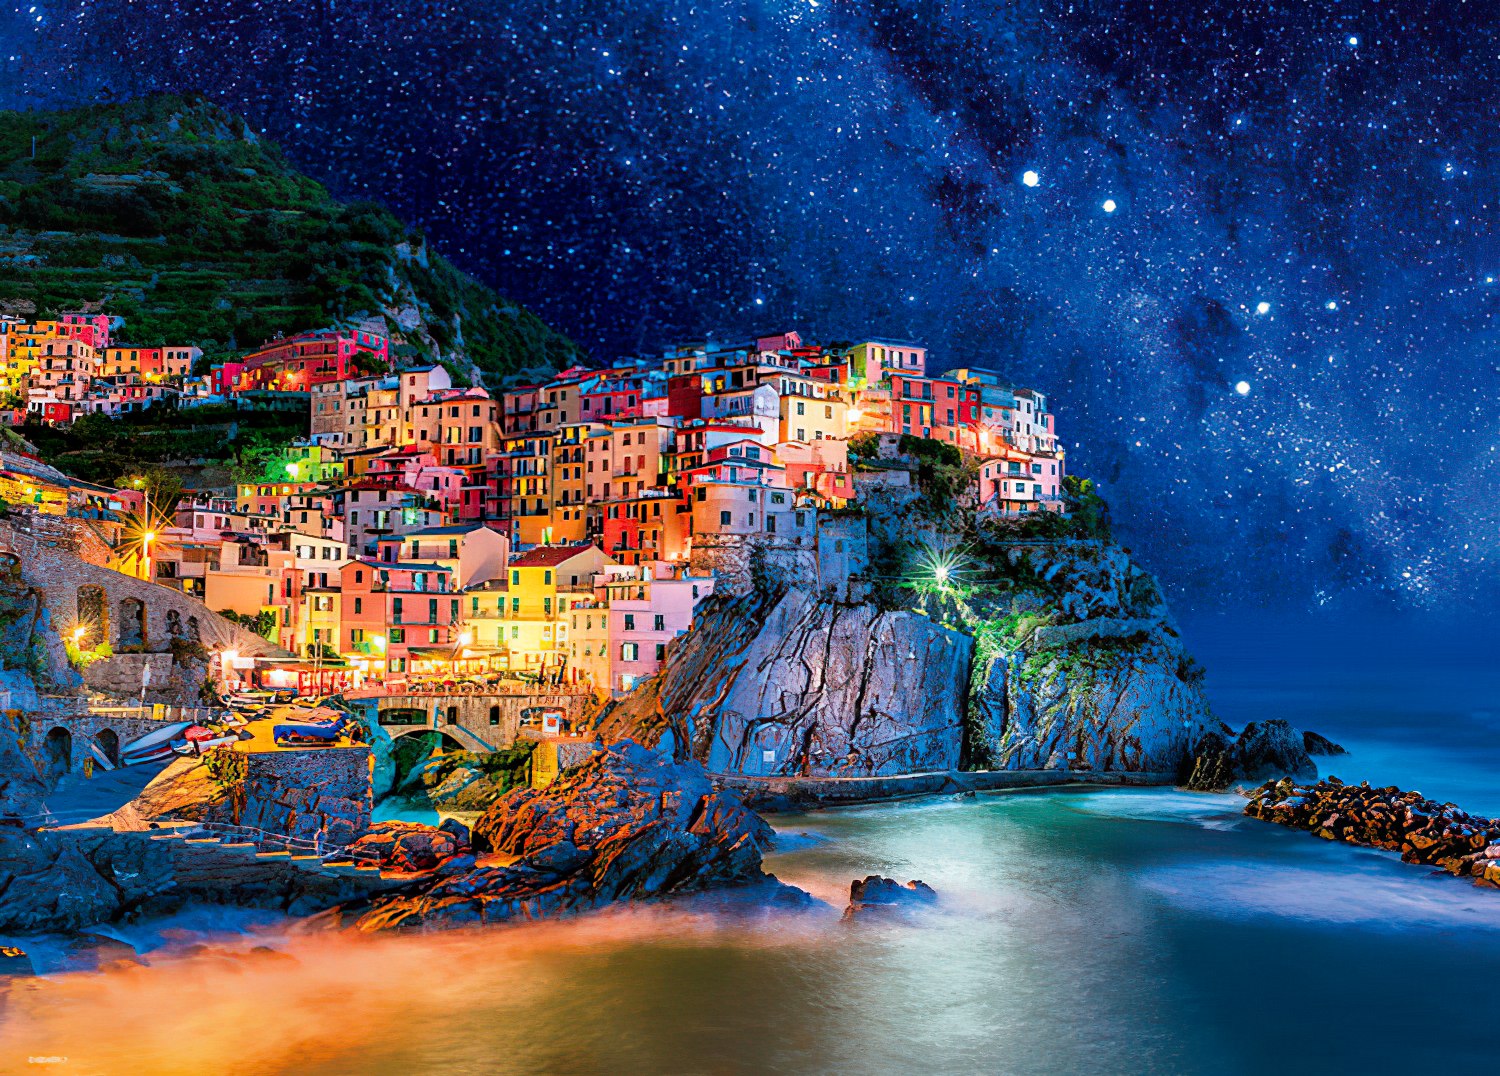 Beverly • Scenery • Starry Sky Cinque Terre　600 PCS　Jigsaw Puzzle